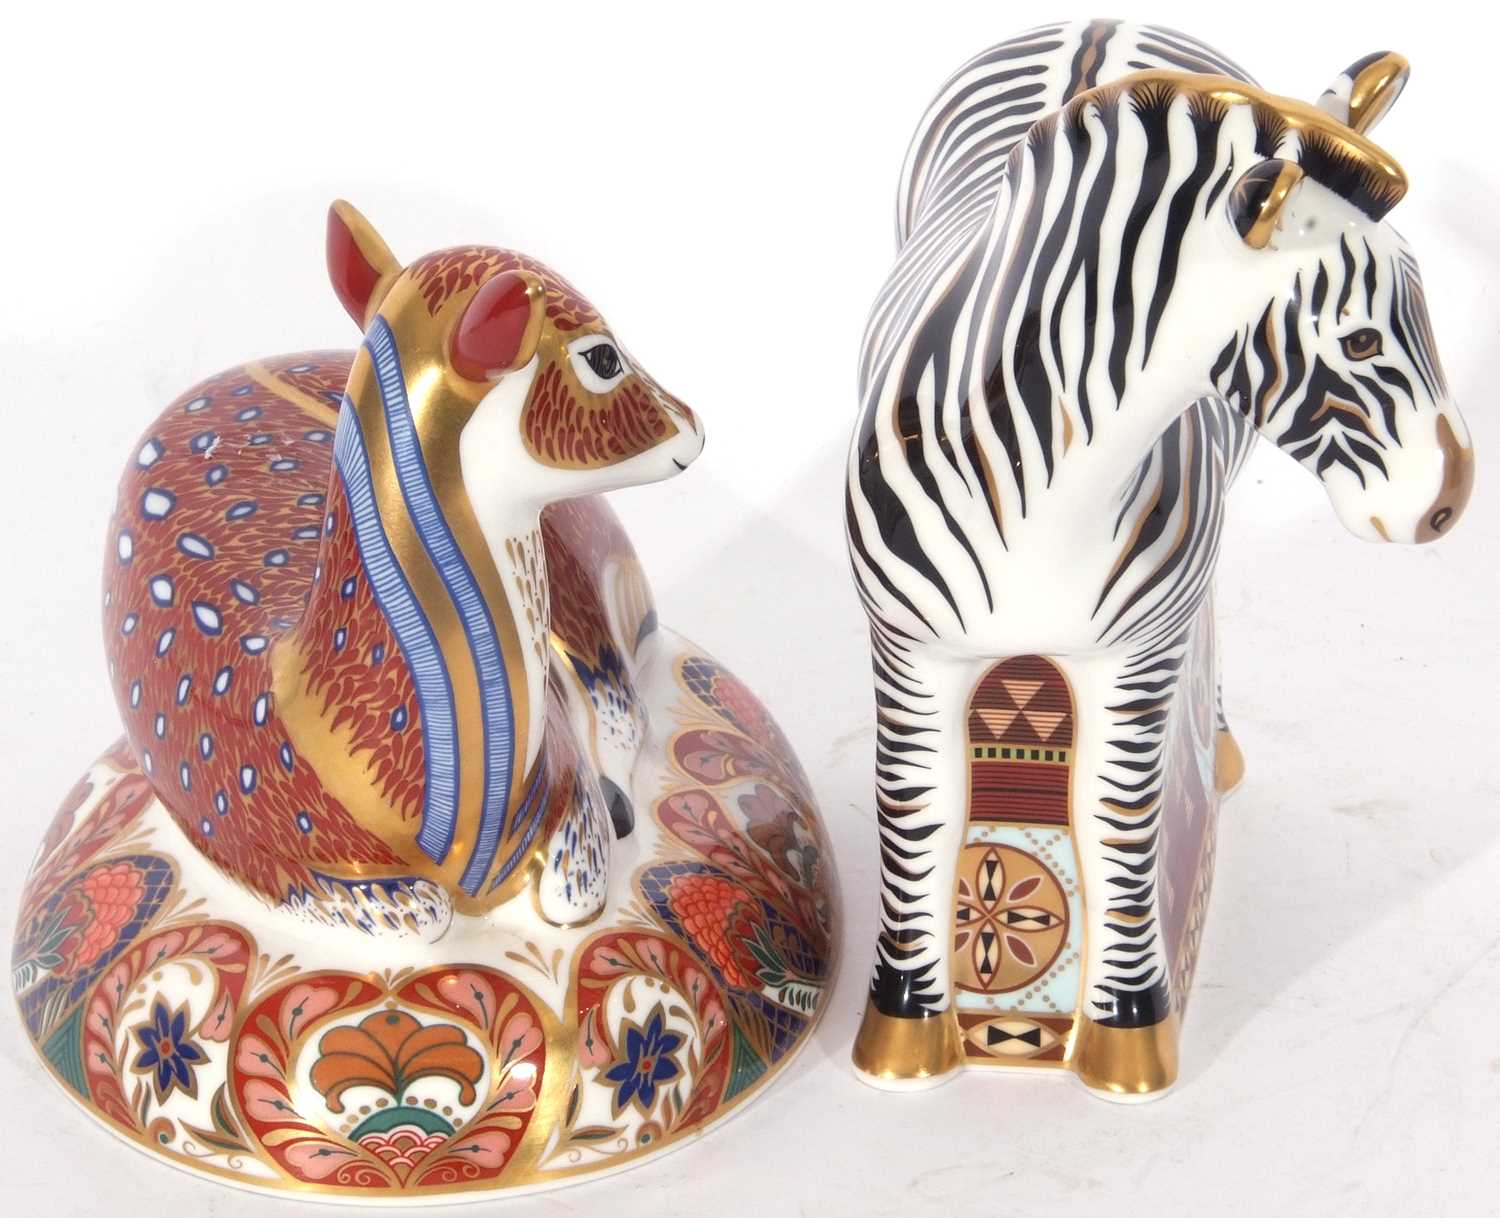 Royal crown derby model of a deer and a zebra (silver stopper) (2)Condition report: Good condition - Image 6 of 6